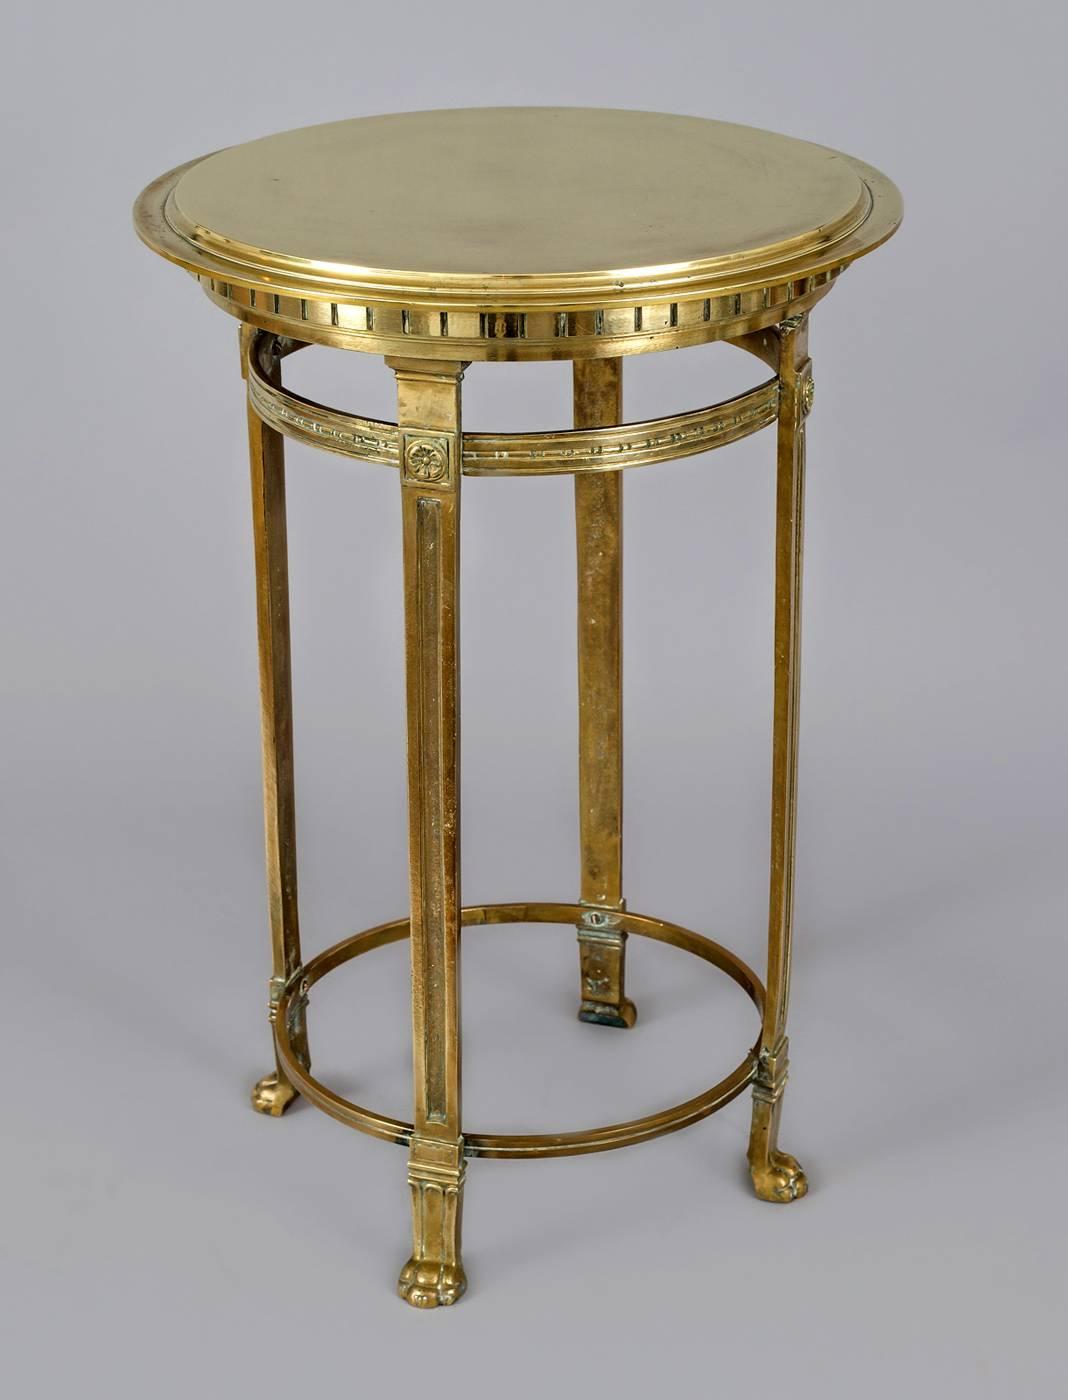 Early 20th Century French Bronze Round Gueridon Table For Sale